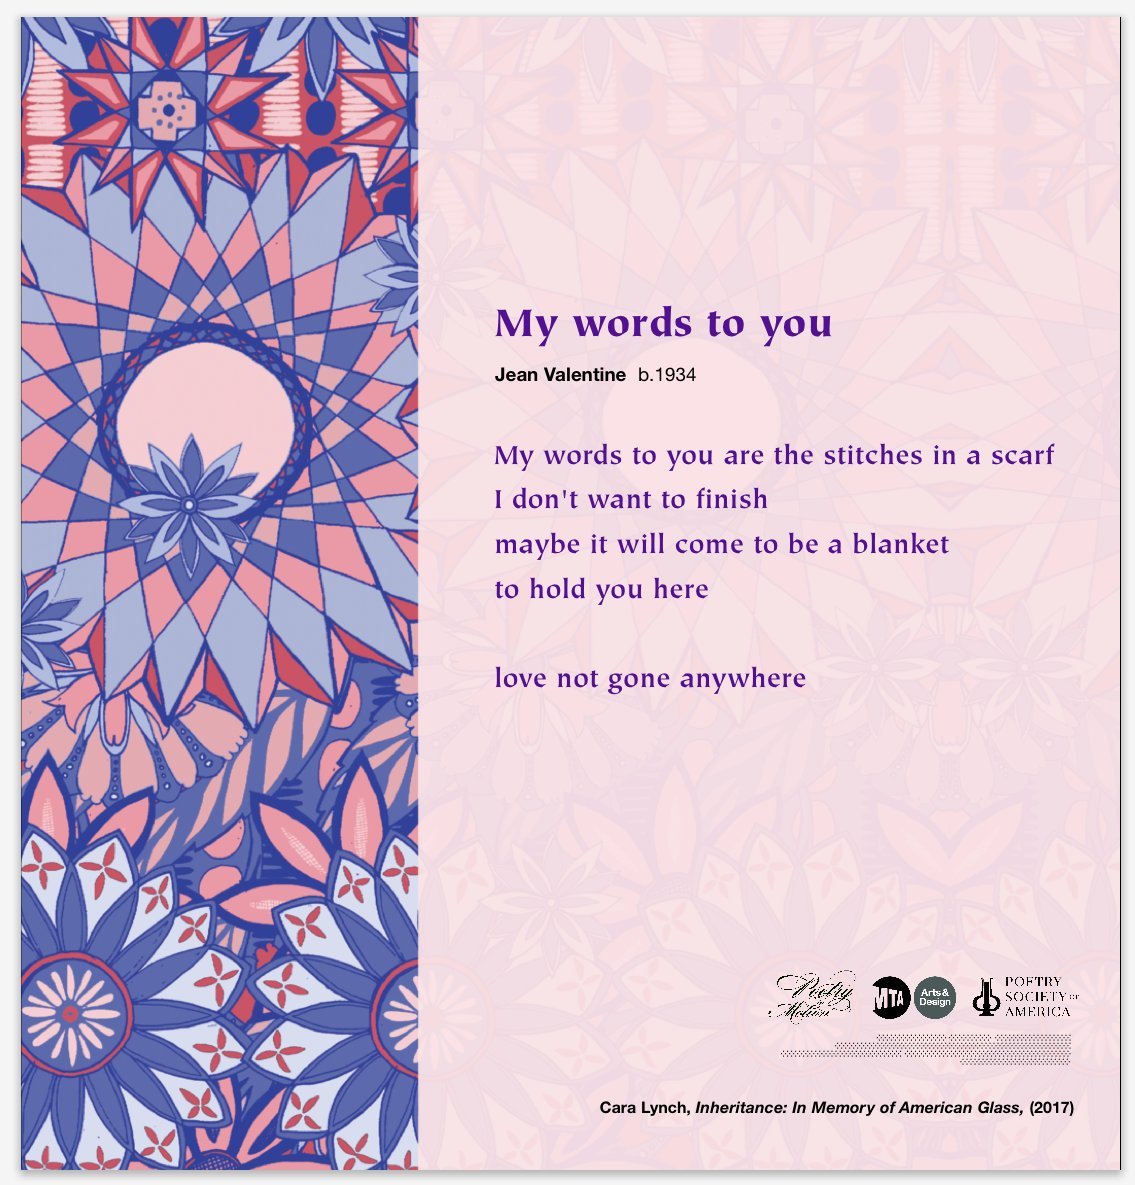 A poster featuring art by Cara Lynch depicts a kaleidoscopic abstraction in hues of pink and purple. To the right of this is a poem titled My words to you, written by Jean Valentine.